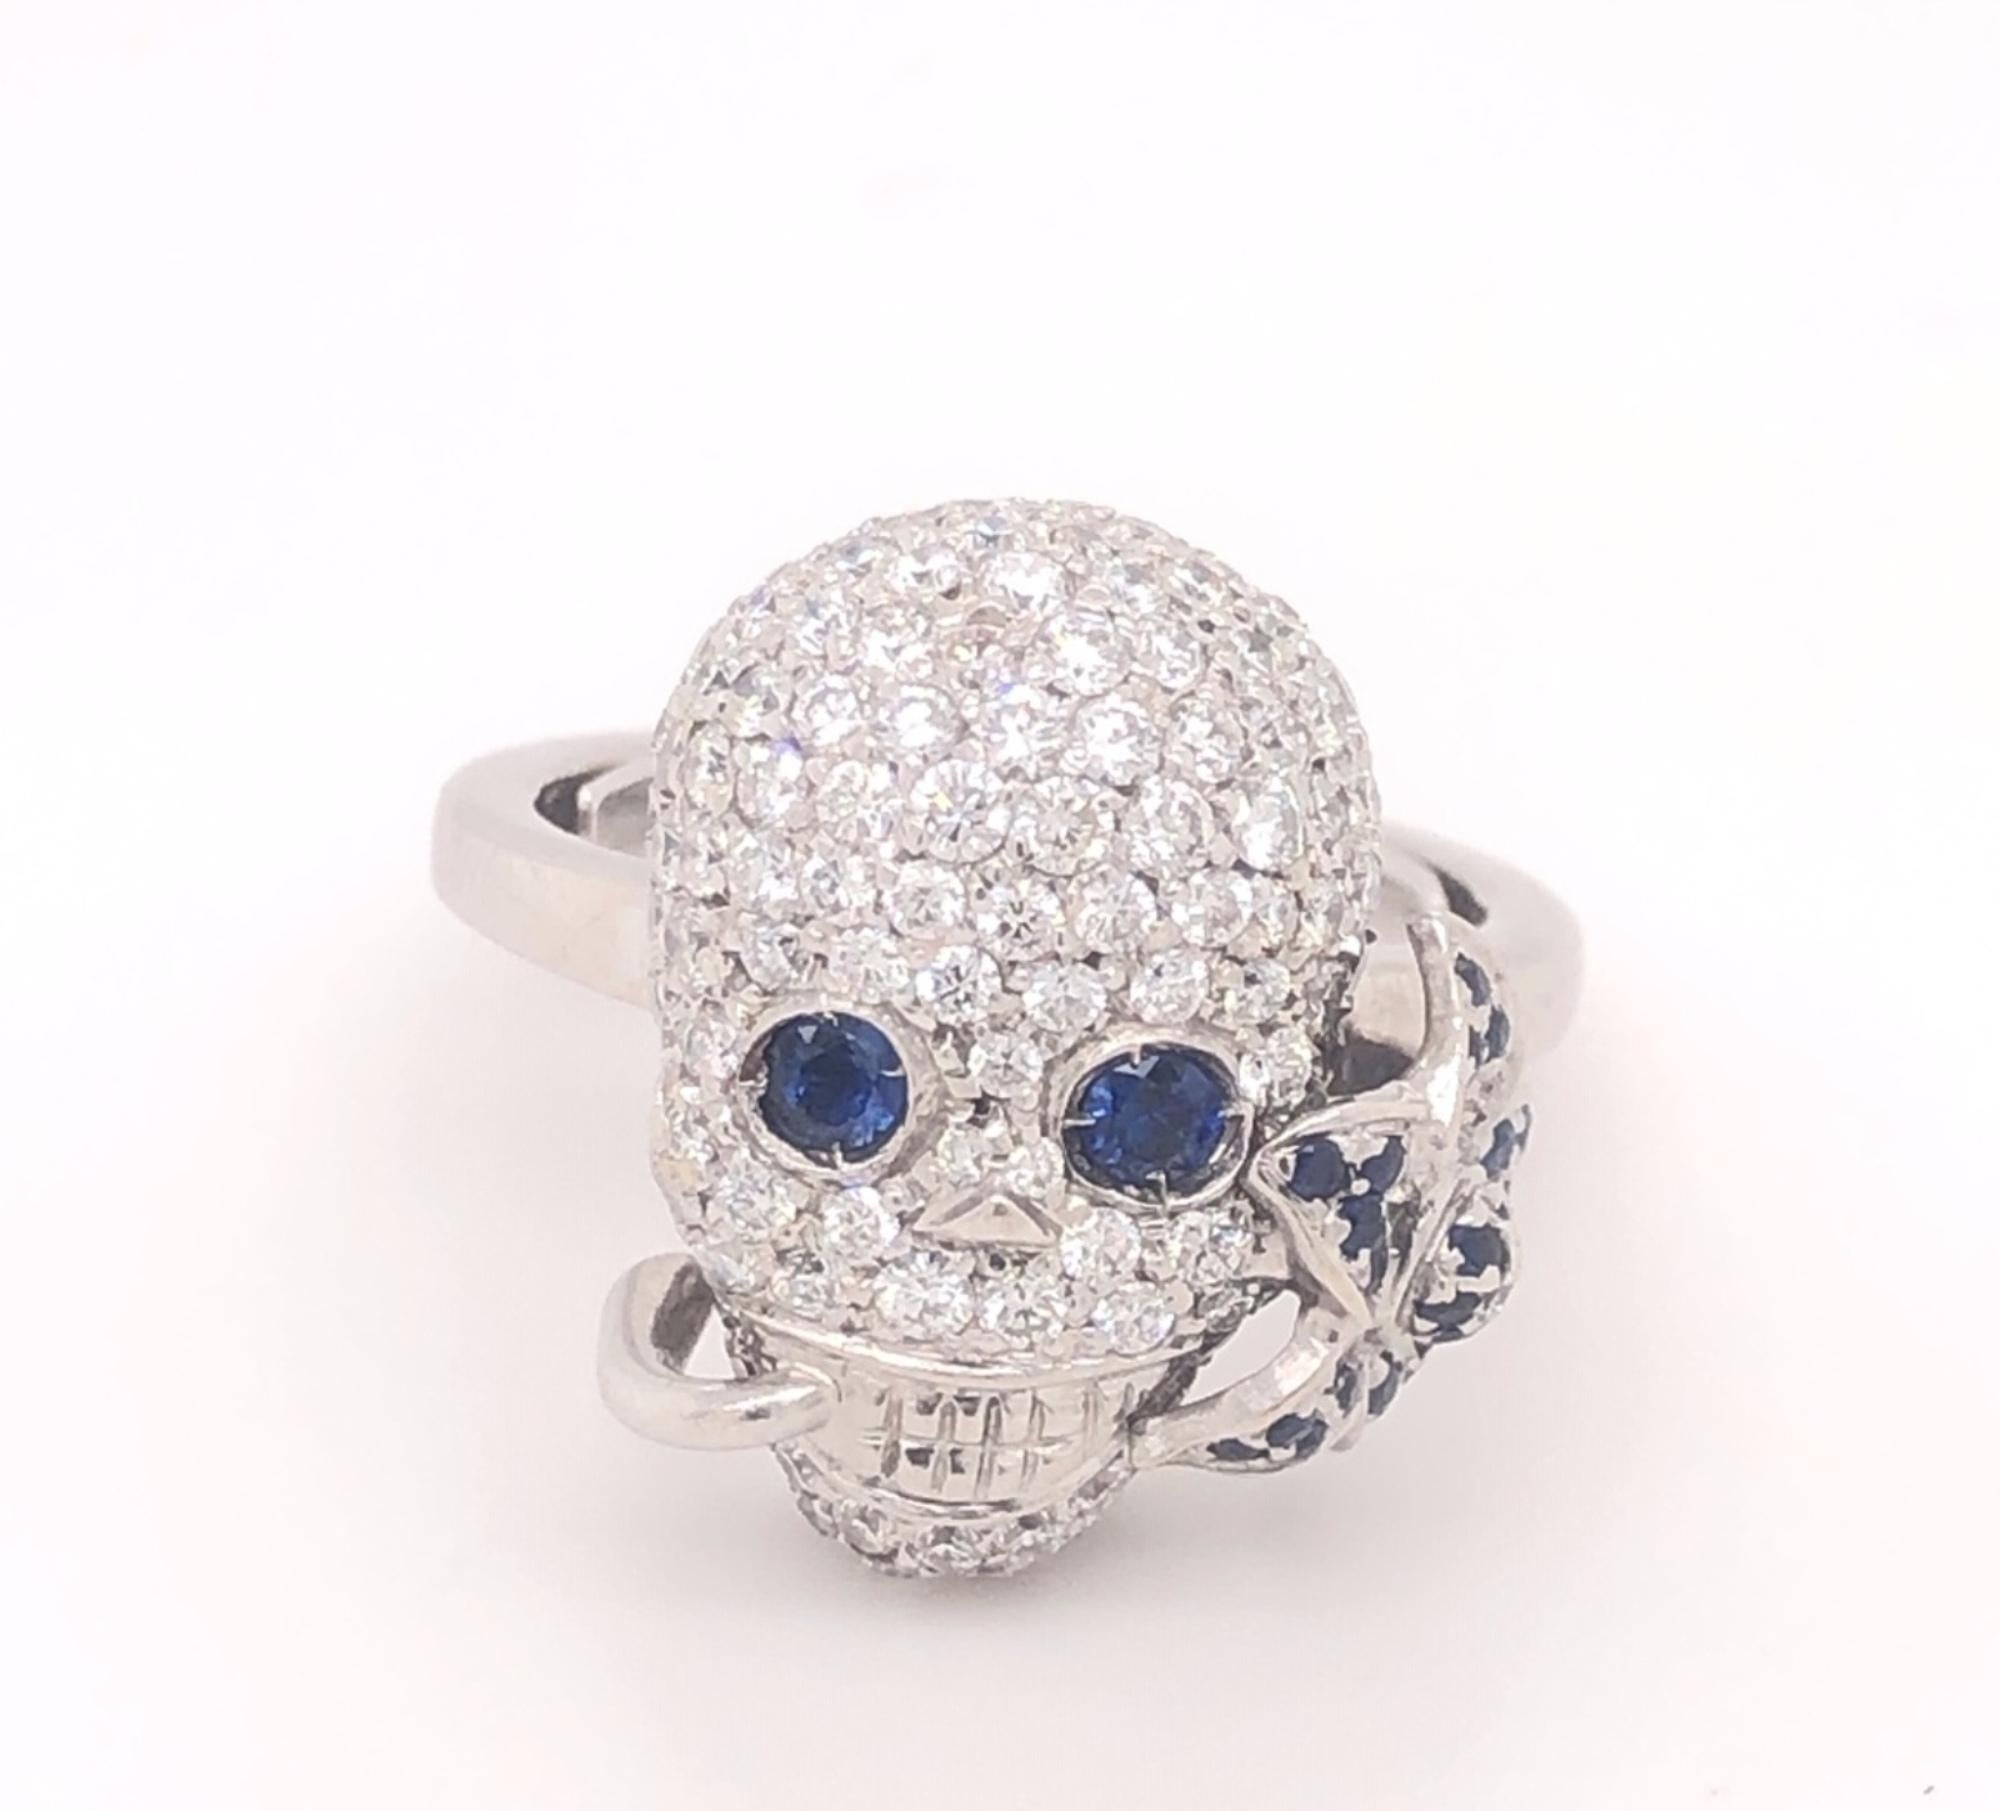 Authentic Gucci Diamonds Sapphires Flora Skull Ring 18K White Gold. This is a stunning skull ring set with pave diamonds and natural sapphire eyes and flower in his mouth. The retail price from Gucci is $9850. The diamonds are H color VS-2 clarity